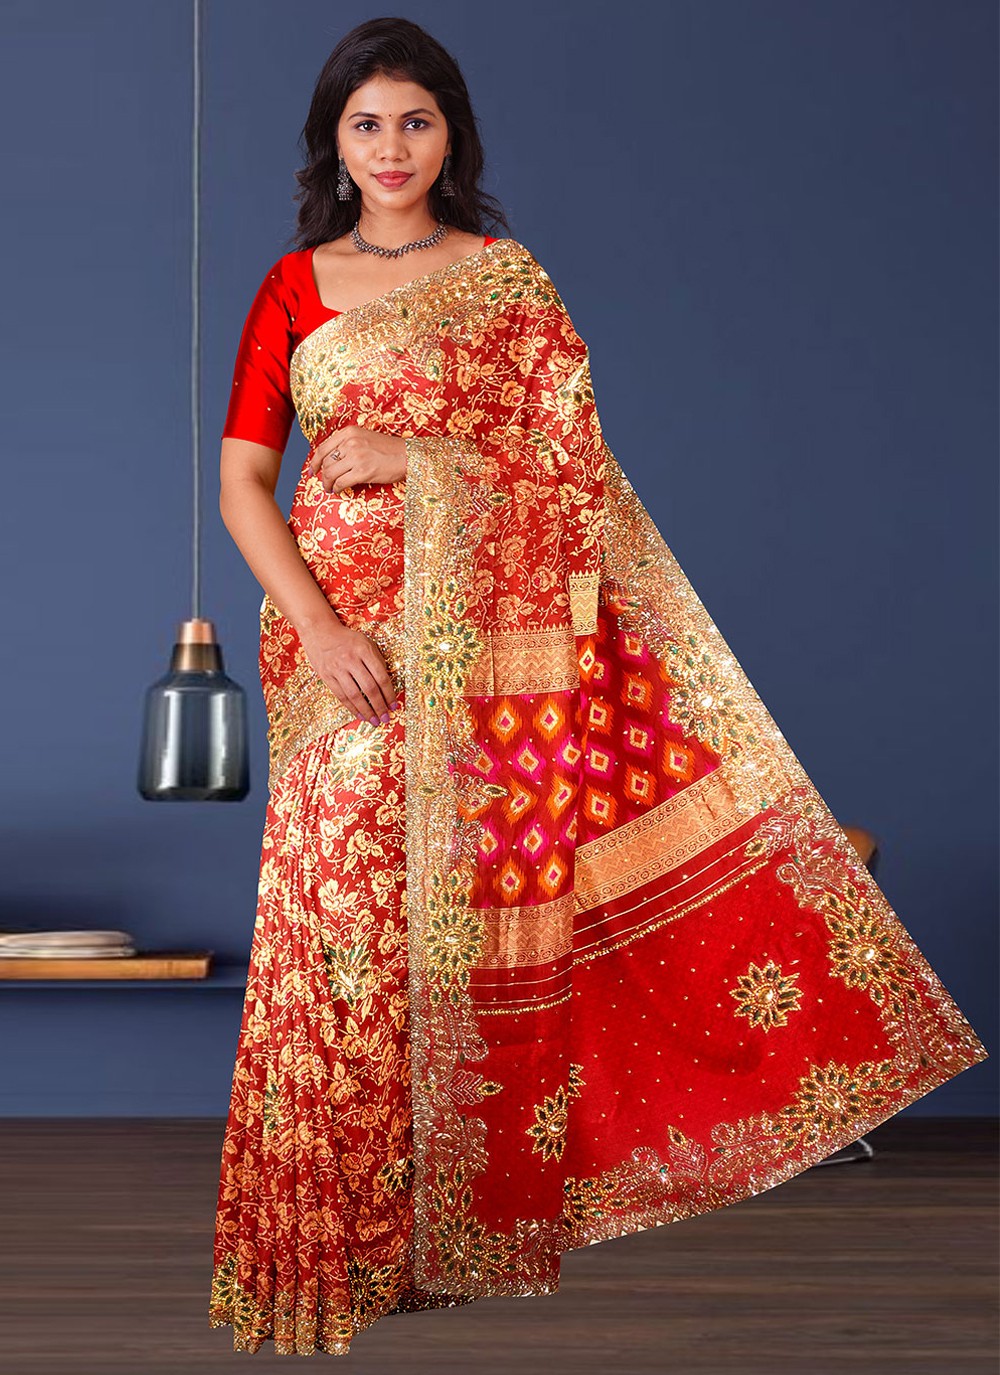 Wedding Saree Look in Red Colour Saree Indian in Usa